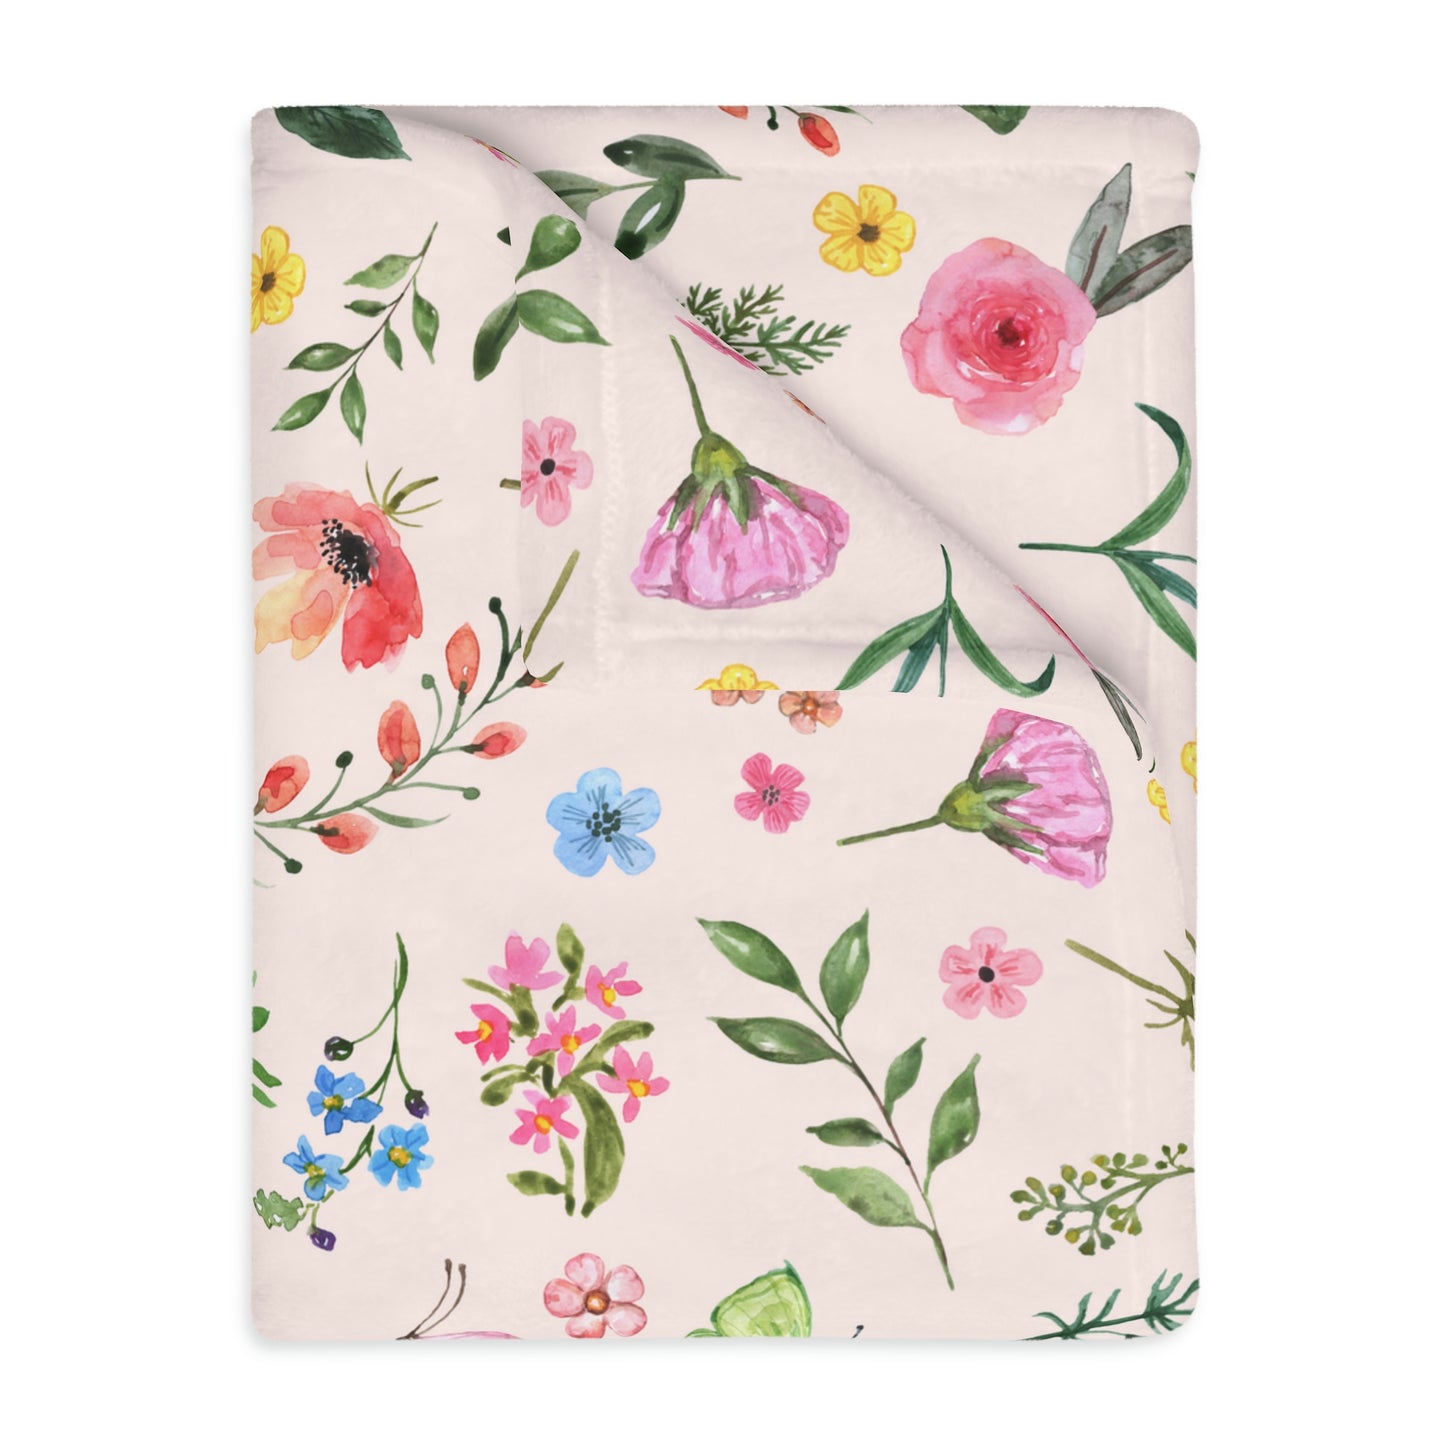 Spring Daisies and Butterflies Velveteen Minky Blanket (Two-sided print)